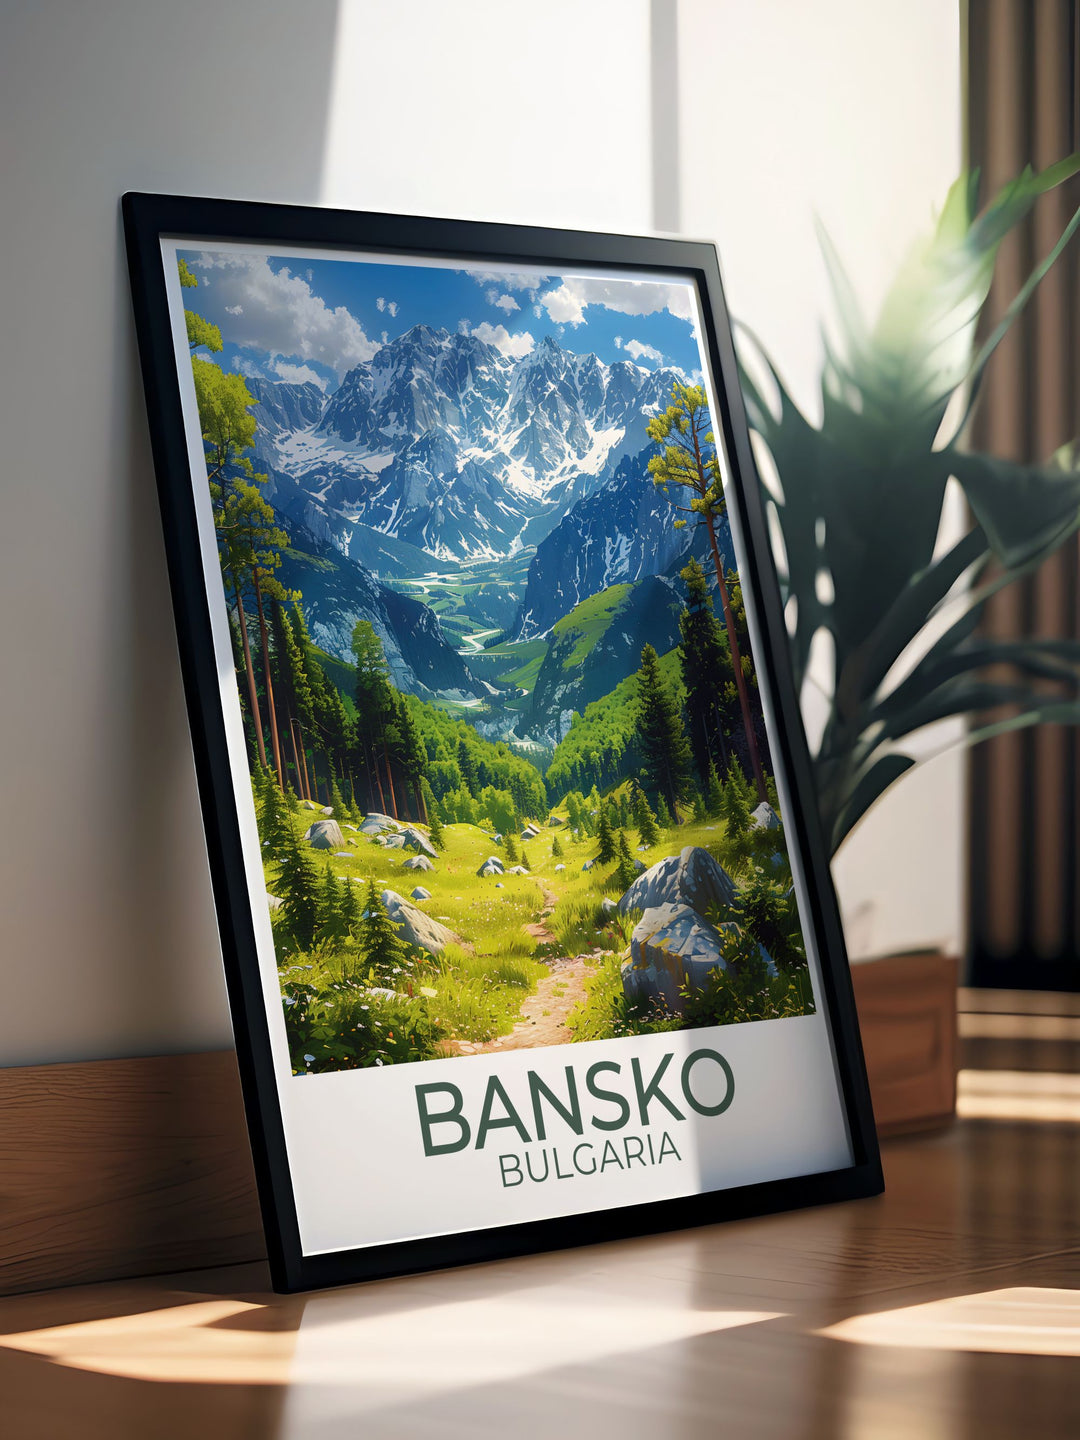 Bansko Ski Resorts modern lifts and stunning mountain views are beautifully depicted in this art print, making it a versatile piece for any home decor.